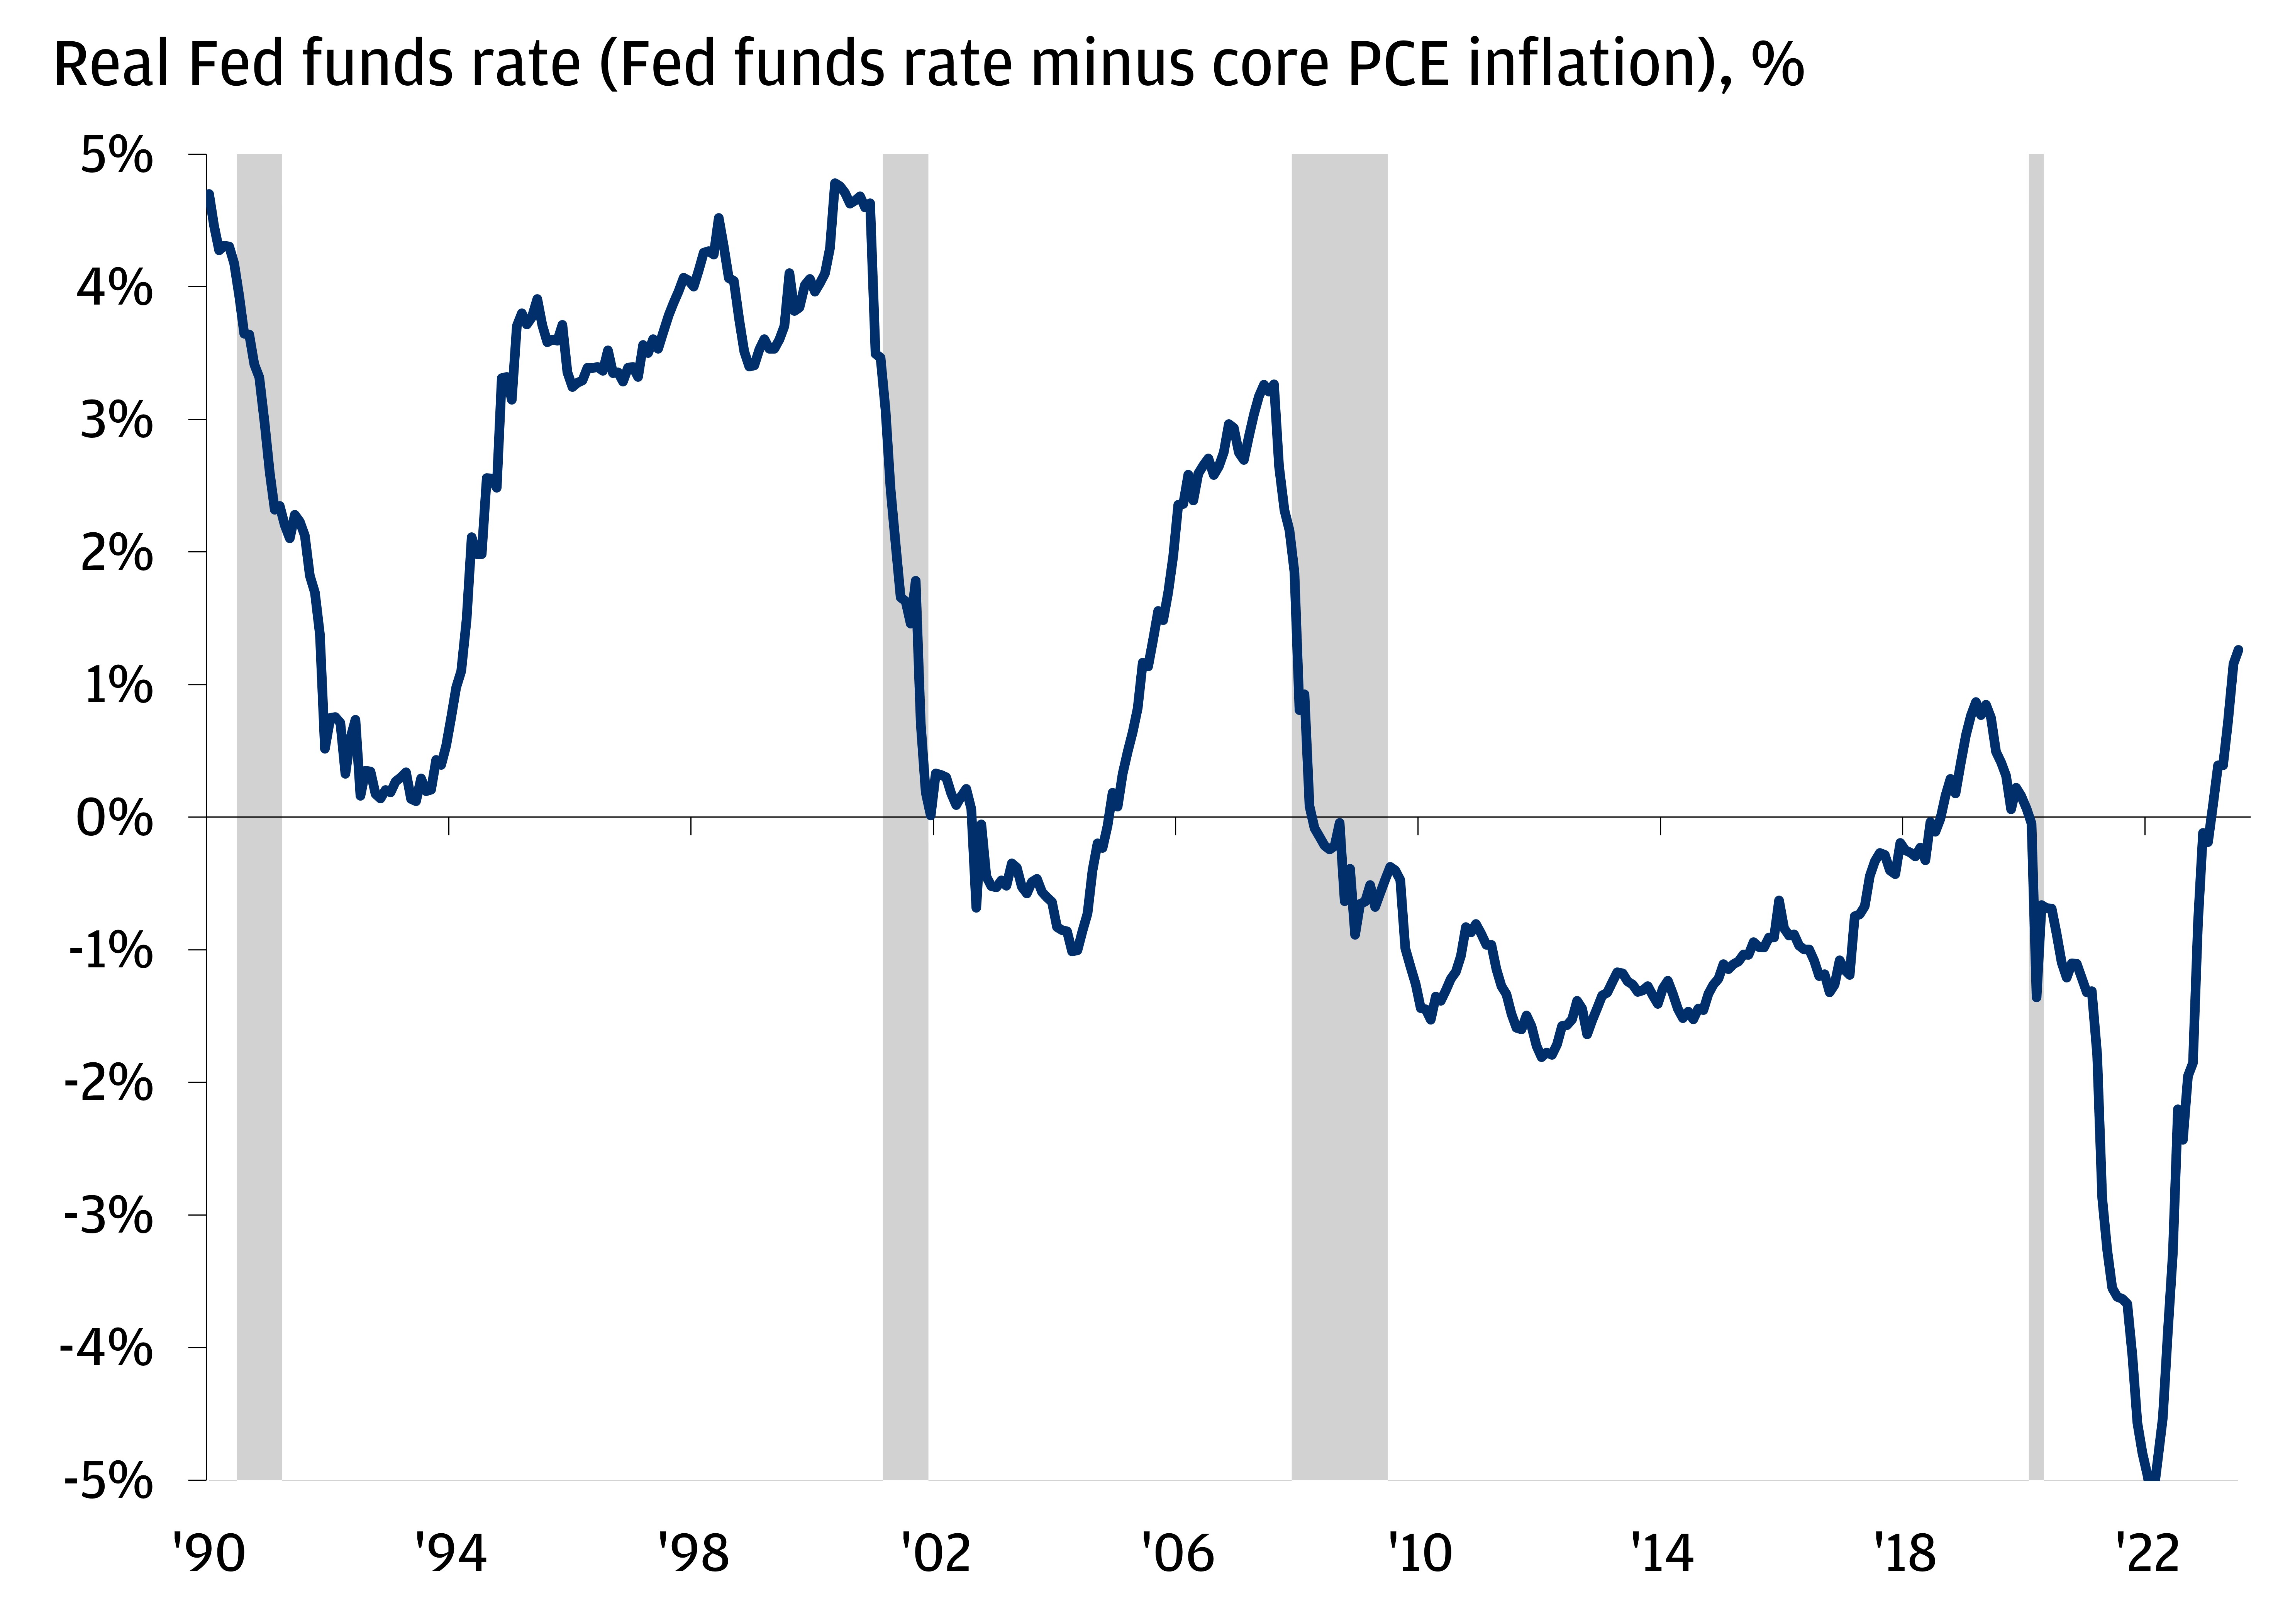 The chart describes the real Fed funds rate (Fed funds rate minus core PCE inflation) in %.